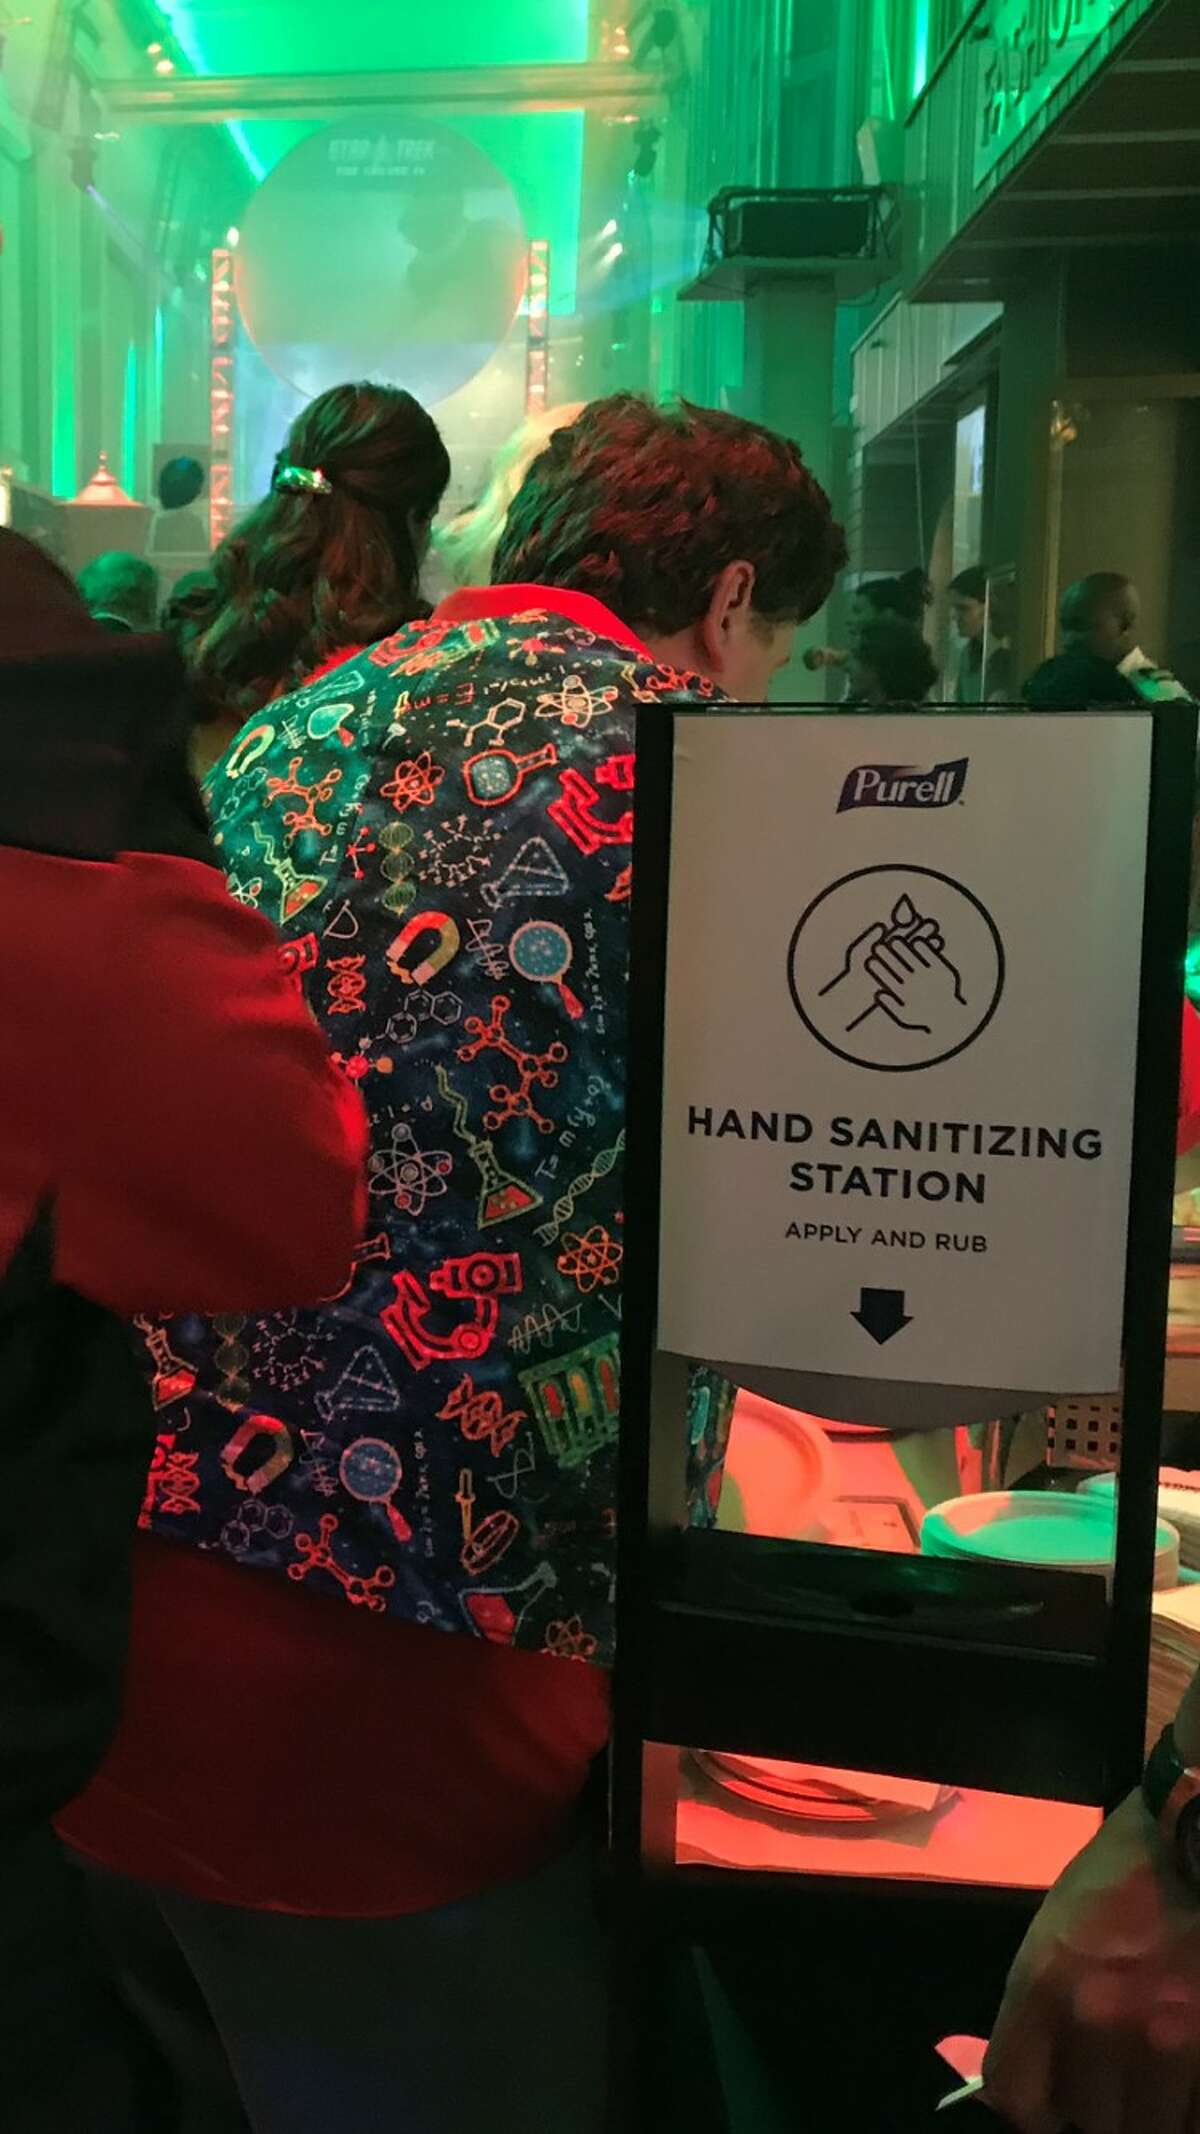 One of many, many hand-sanitizer stations on the "Star Trek" cruise (photo by Amy Biancolli)